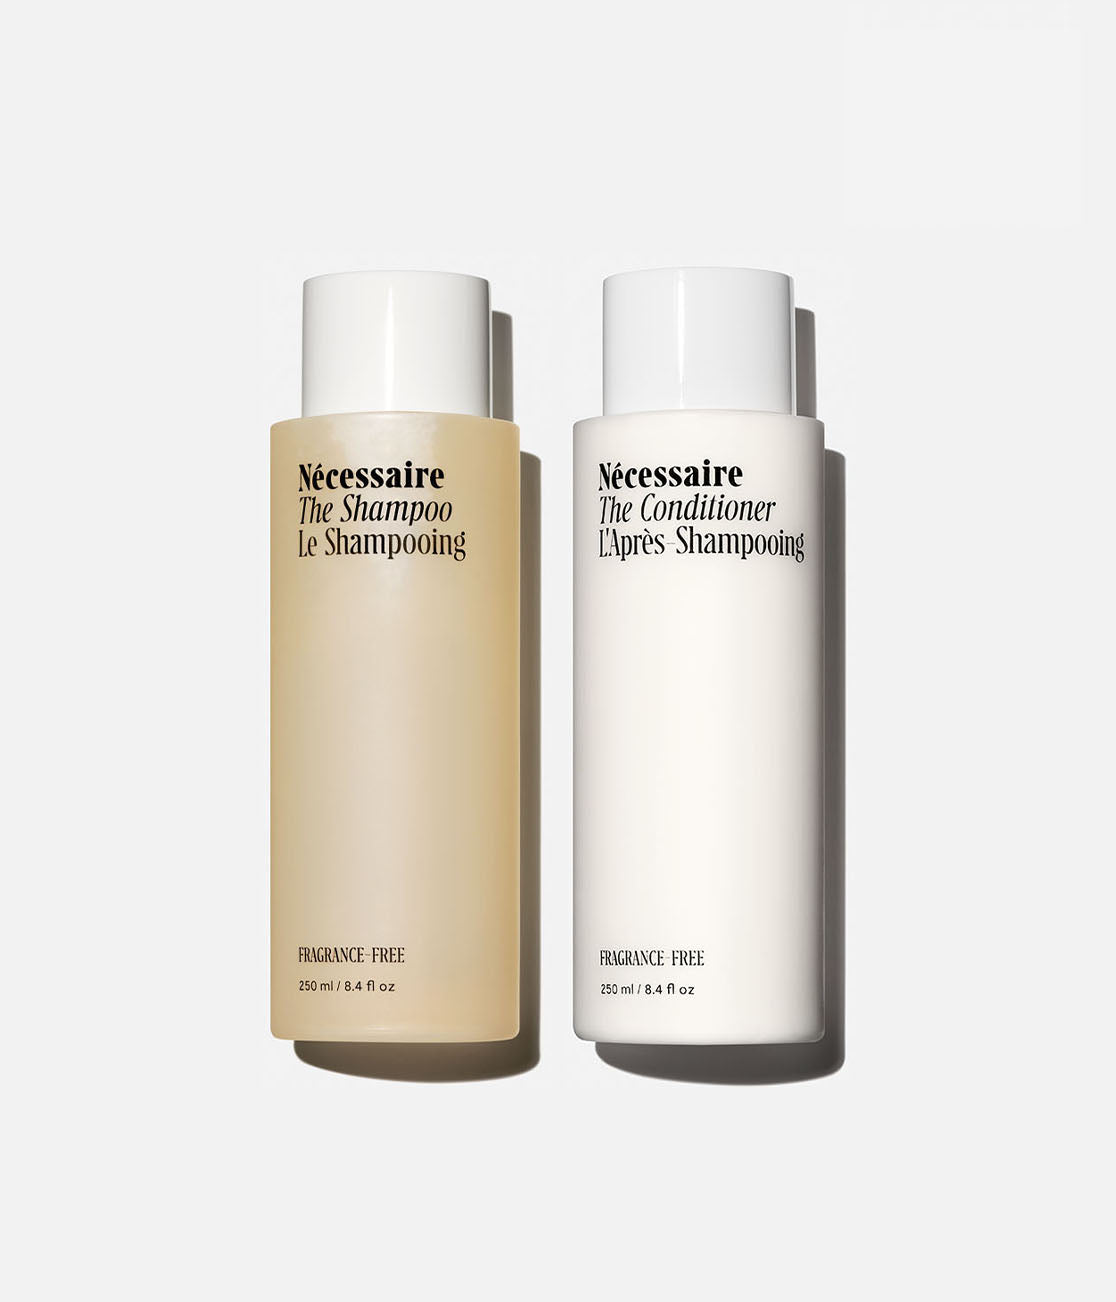 The Hair Duo – Nécessaire, A Personal Care Company